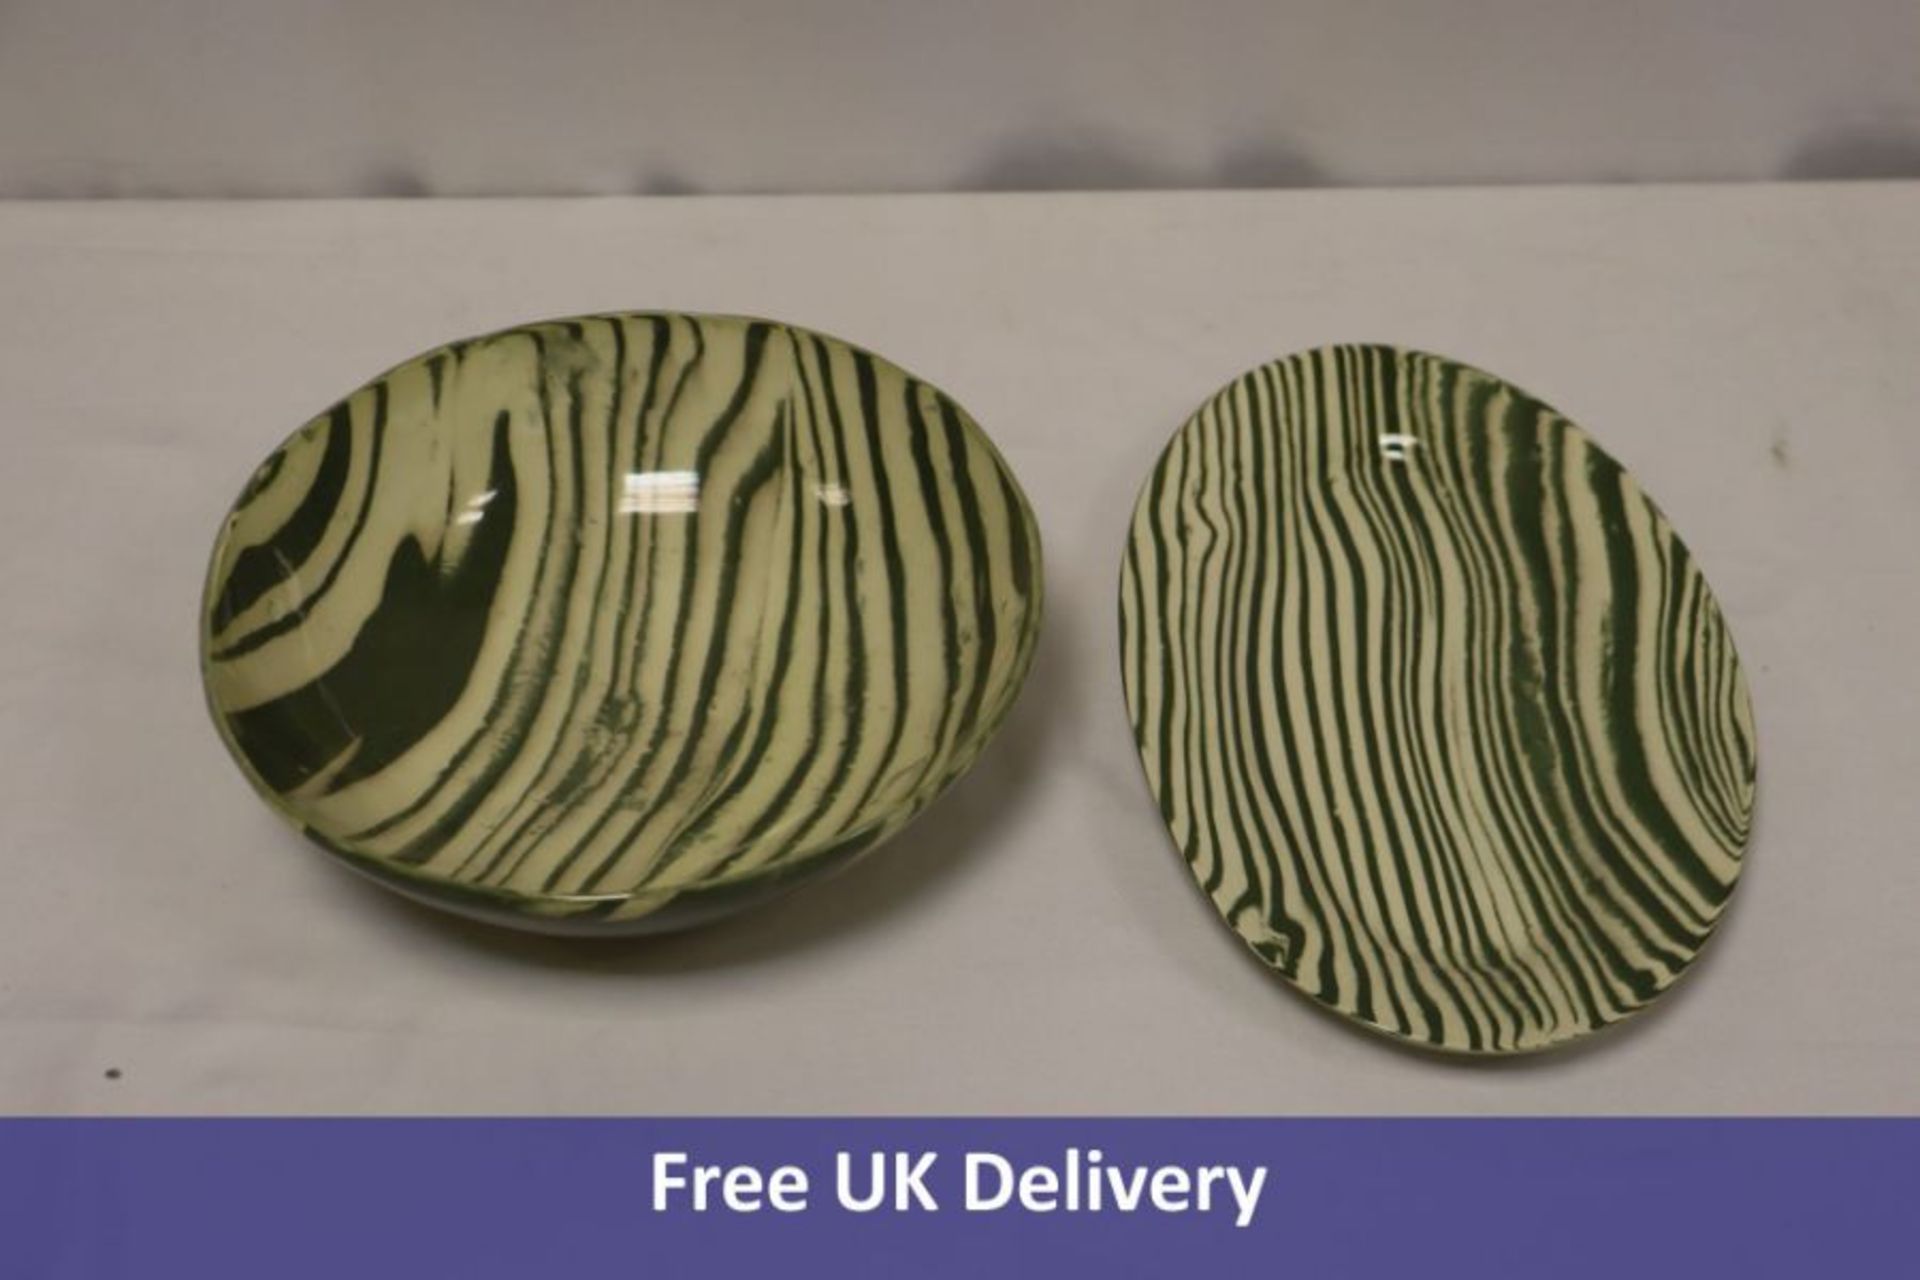 Three Henry Holland items to include 1x Large Salad Bowl, 2x Oval Serving Platters, Green/White